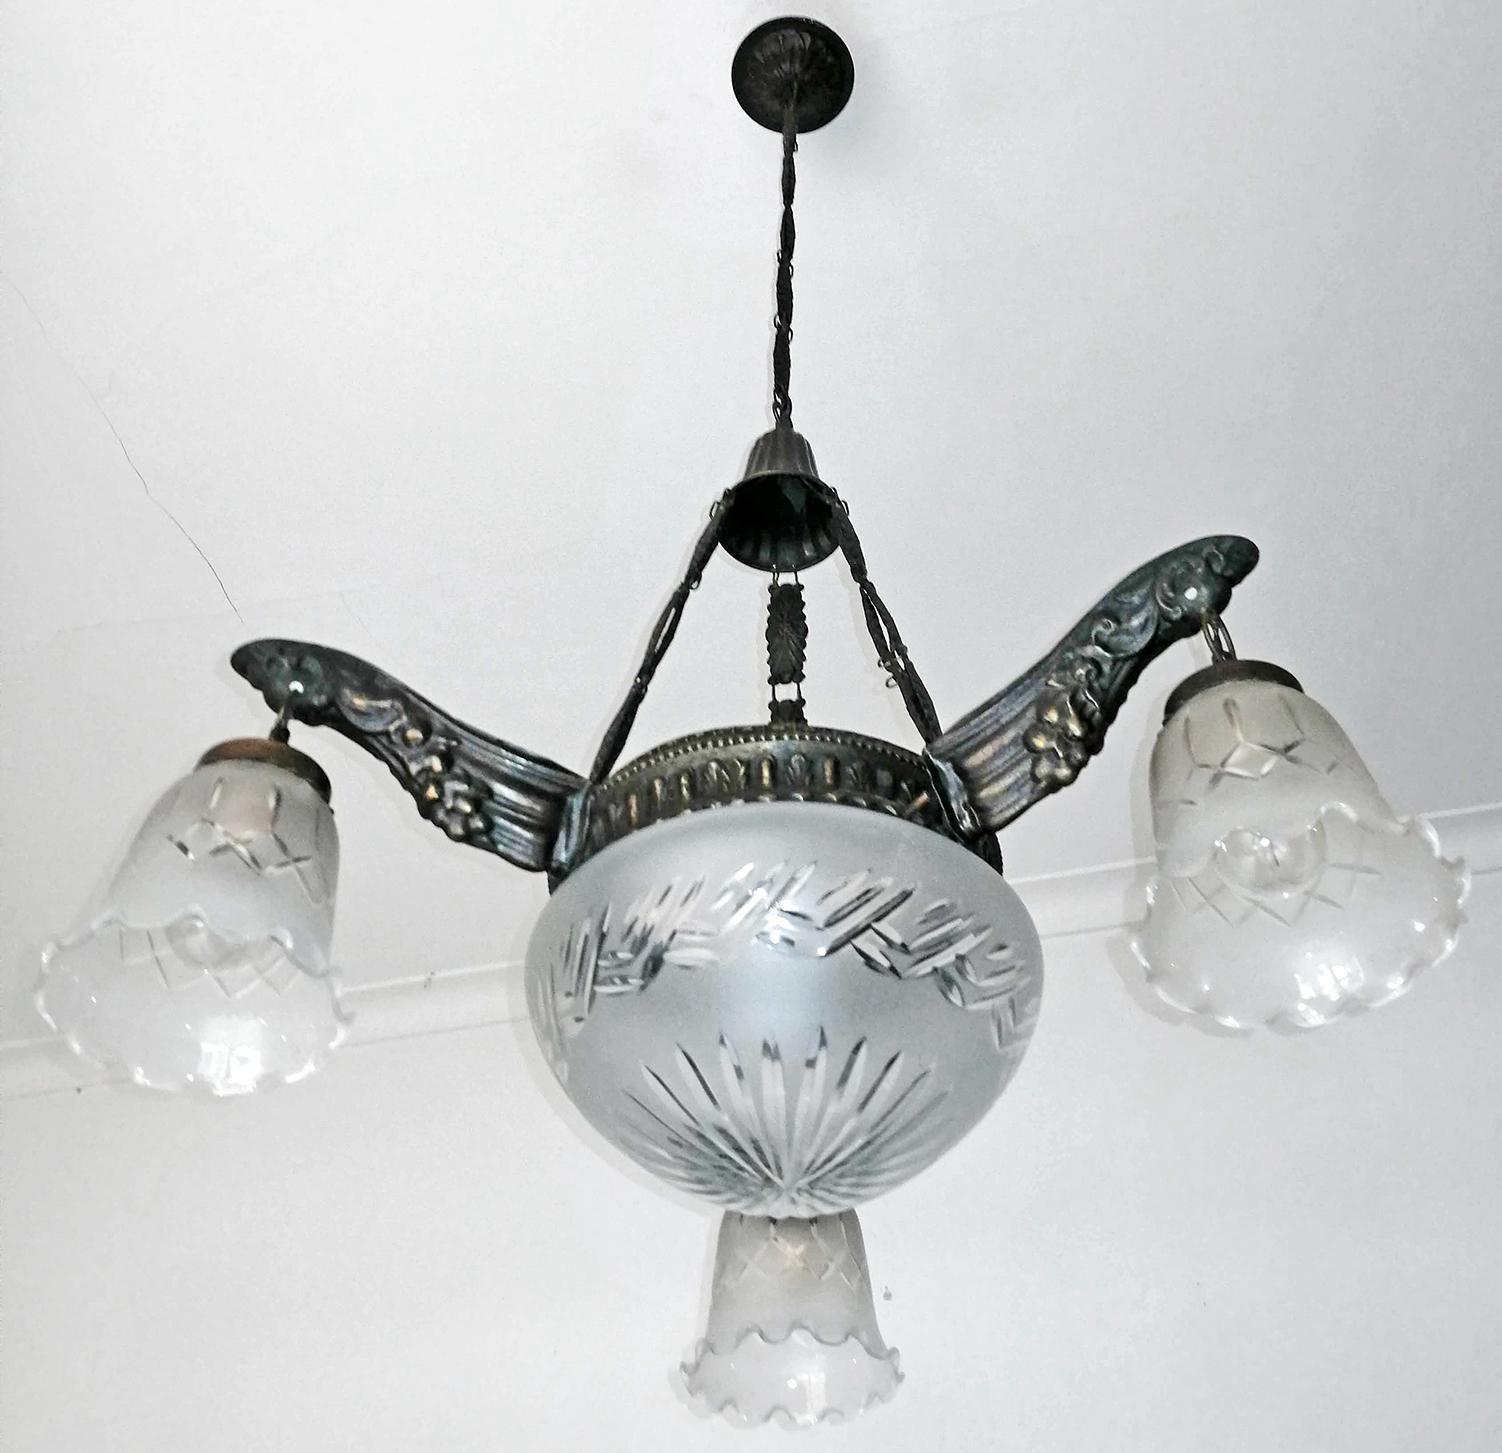 French Degué style Art Deco white frosted cut glass, 4-light chandelier
Measures:
Diameter 25.6 in / 65 cm
Height 41.3 in (chain 15.7 in)/ 105 cm (chain 40 cm)
Weight: 11 lb. (5 kg).
4-light bulbs E27
Good working condition
Assembly required. Bulbs